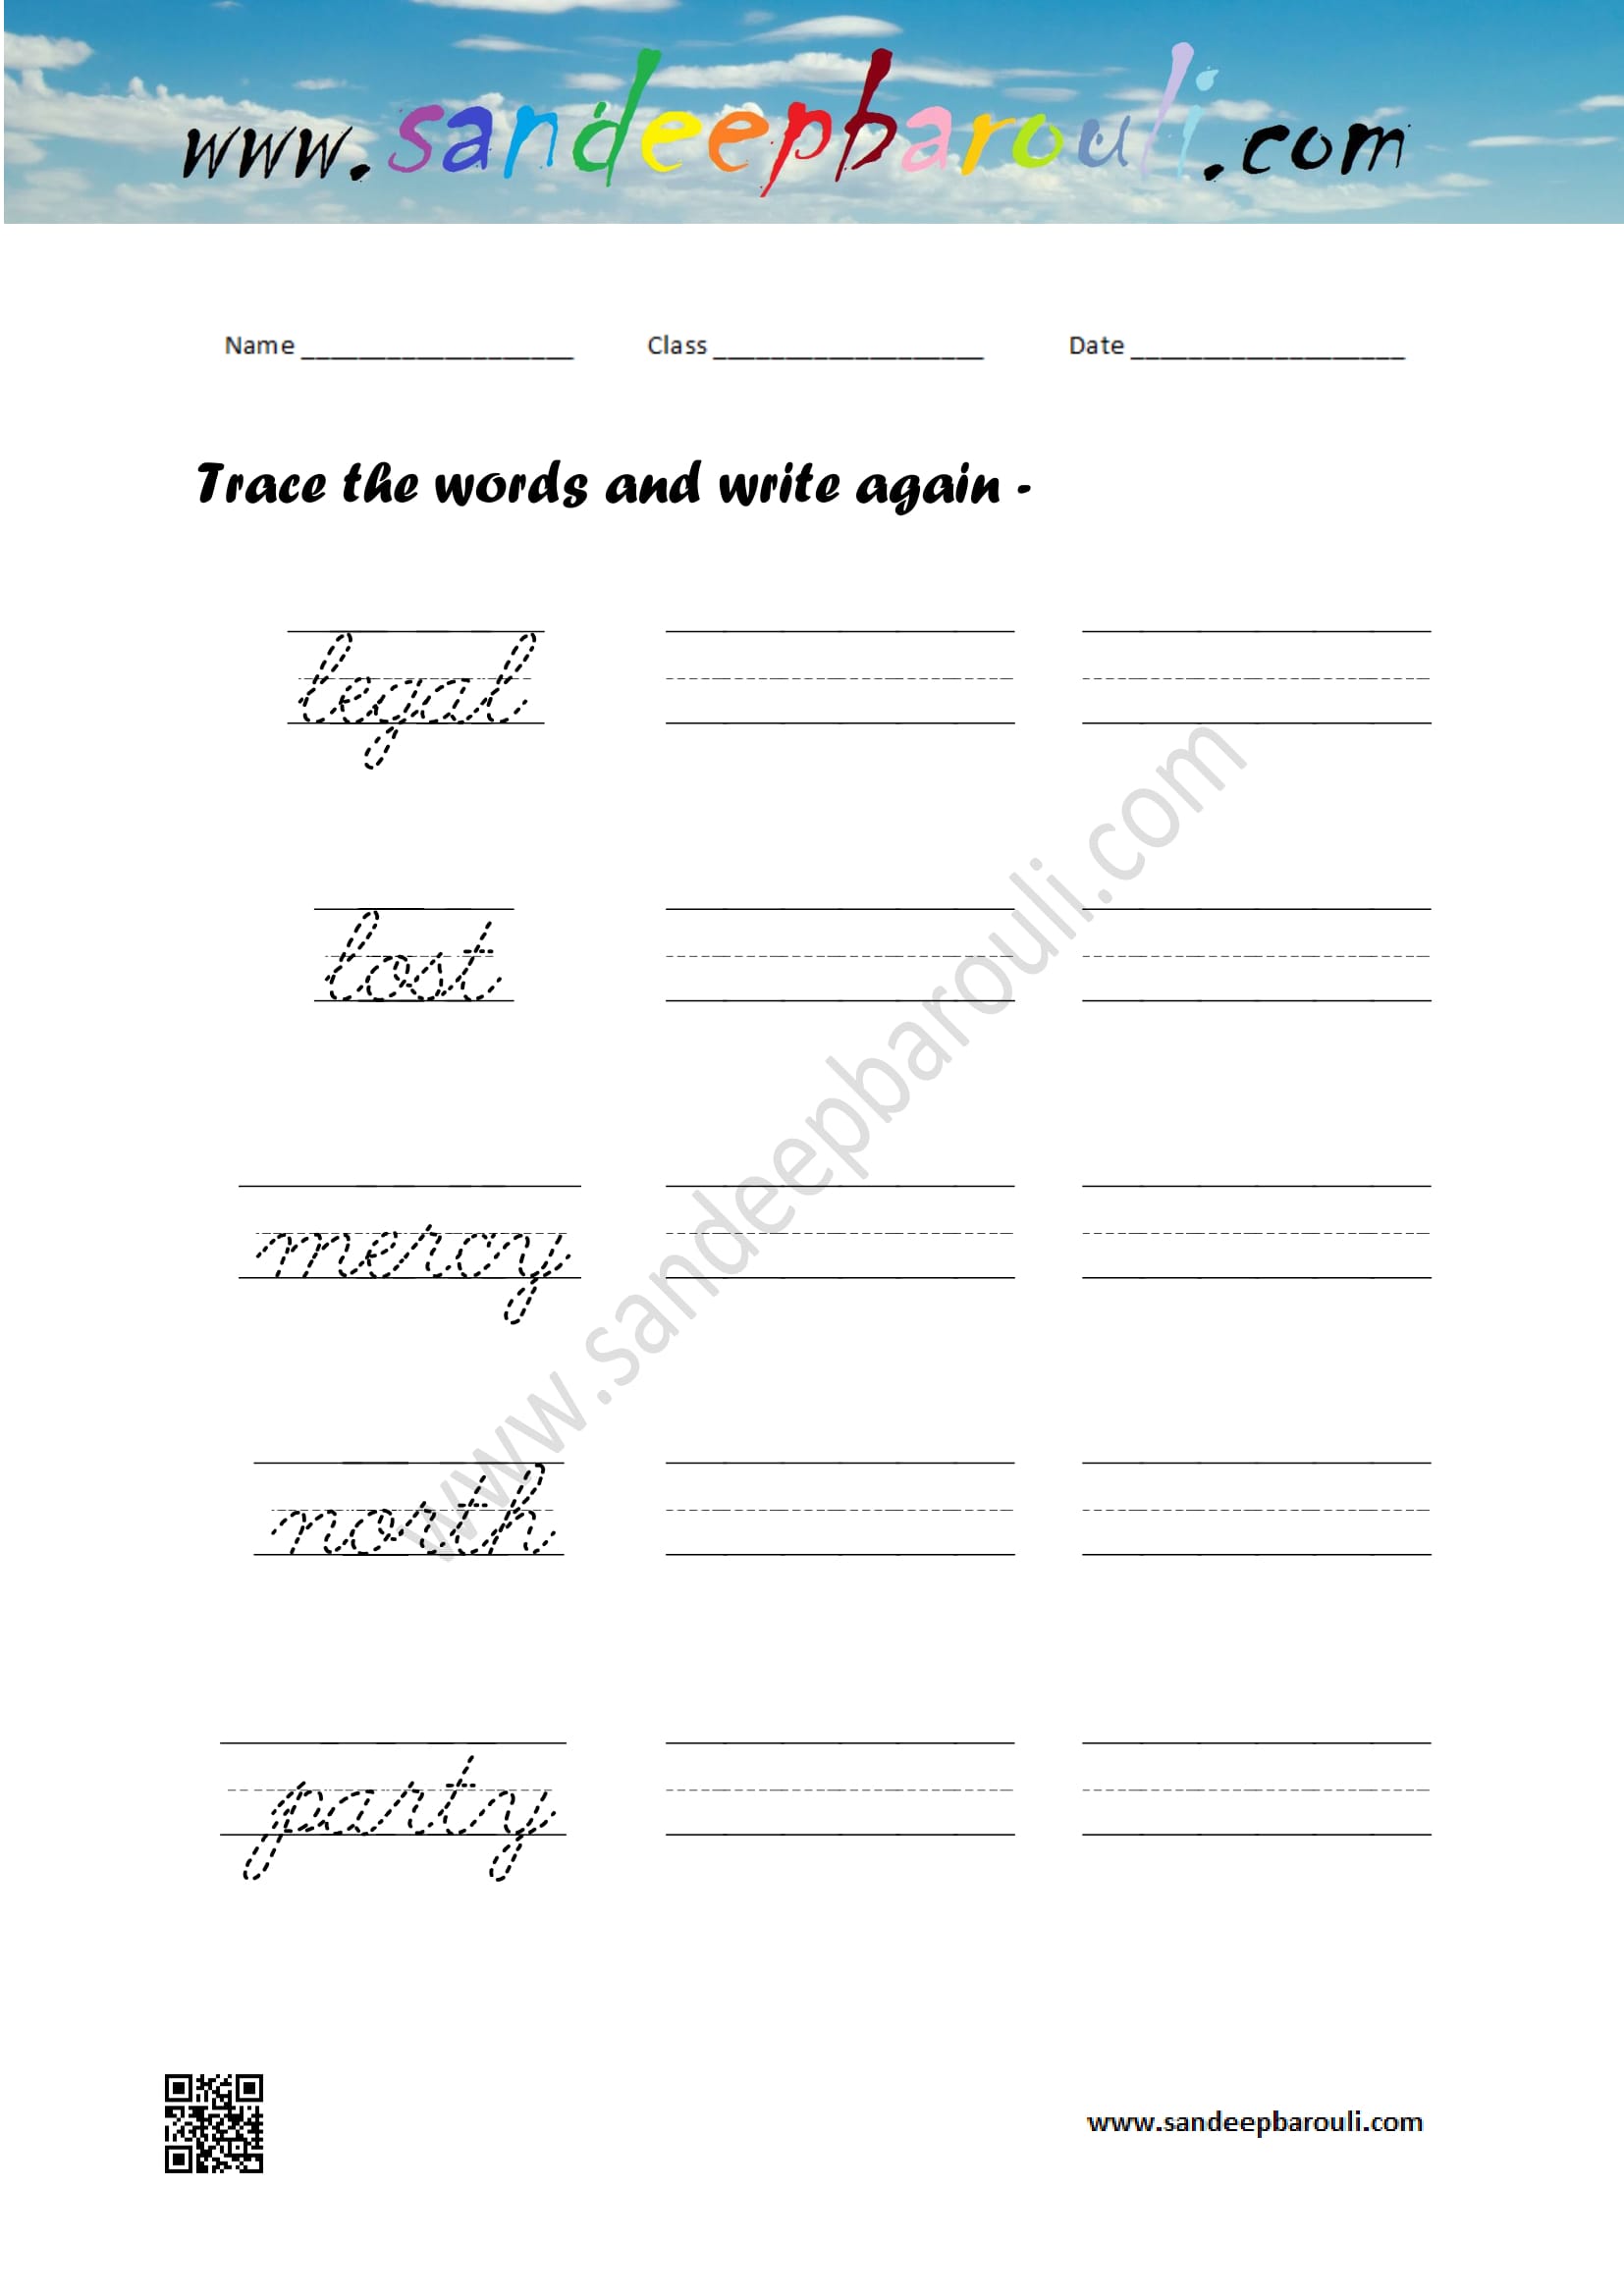 Cursive writing worksheet – trace the words and write again (75)